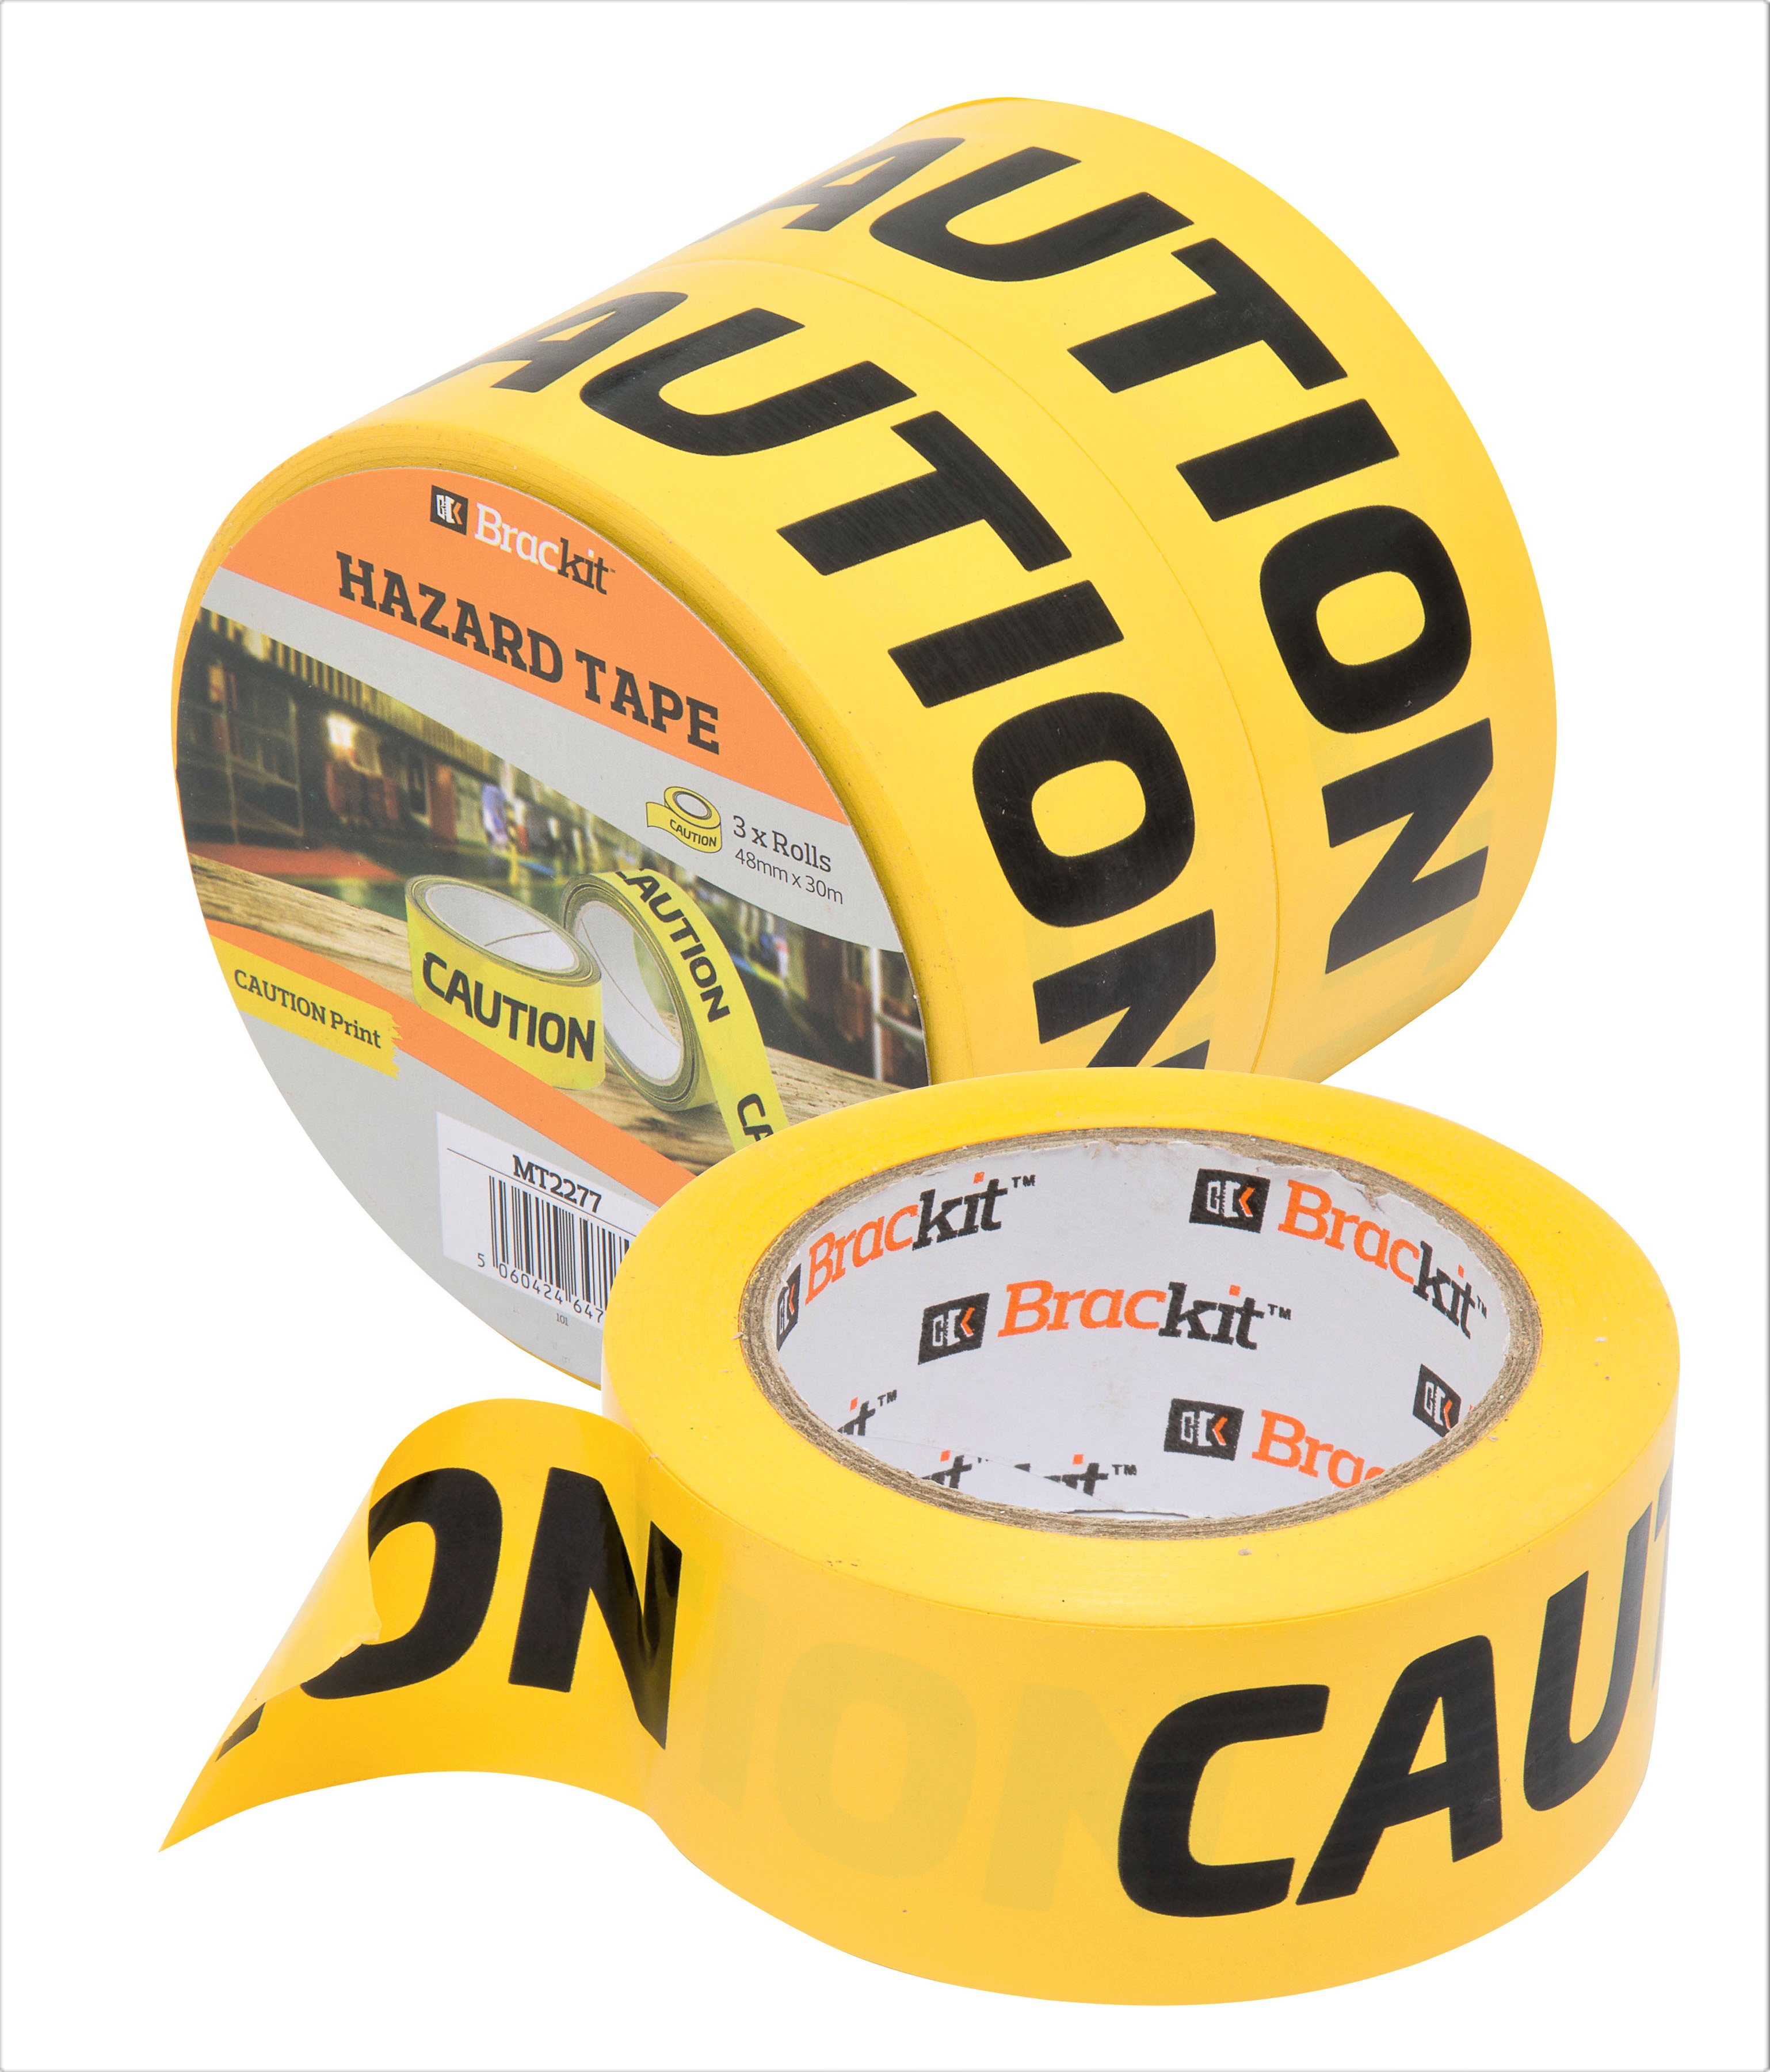 24 Rolls (8 3 packs) of Brackit Caution Adhesive Tape 48mm x 30m - Yellow and Black Hazard Warning and Safety Marking